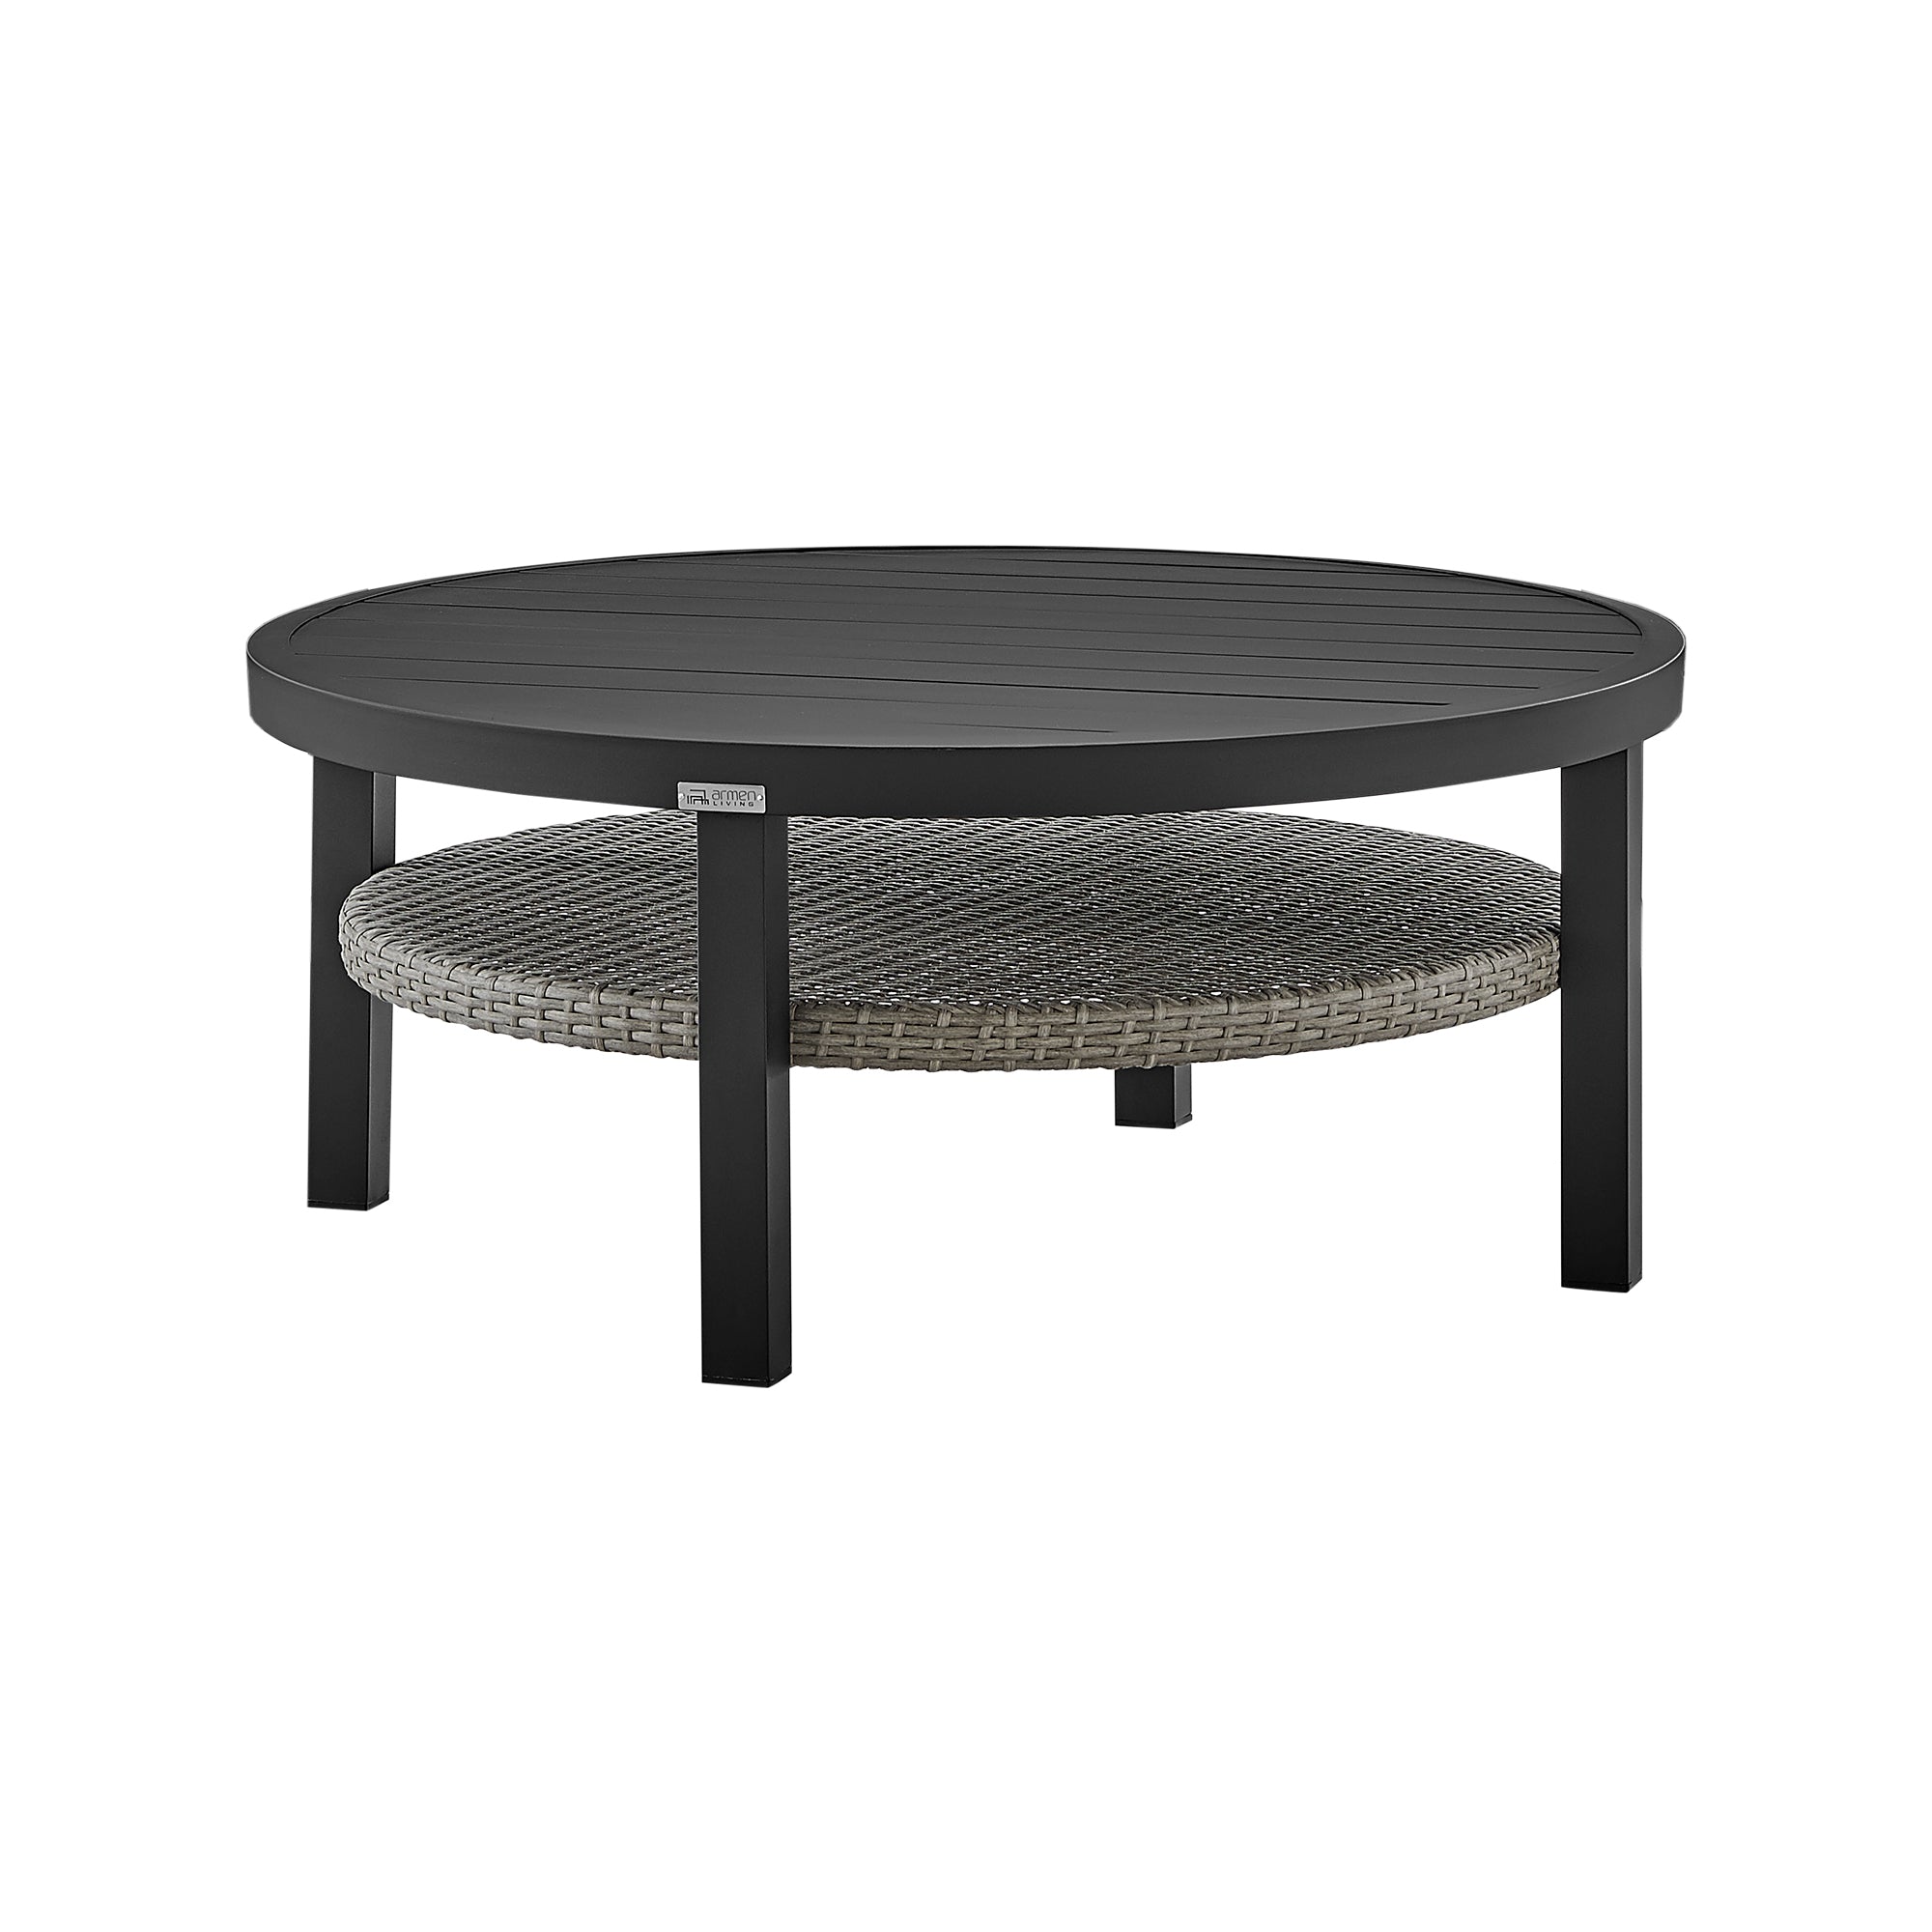 Armen Living - Aileen Outdoor Patio Round Coffee Table in Black Aluminum with Grey Wicker Shelf - 840254332508